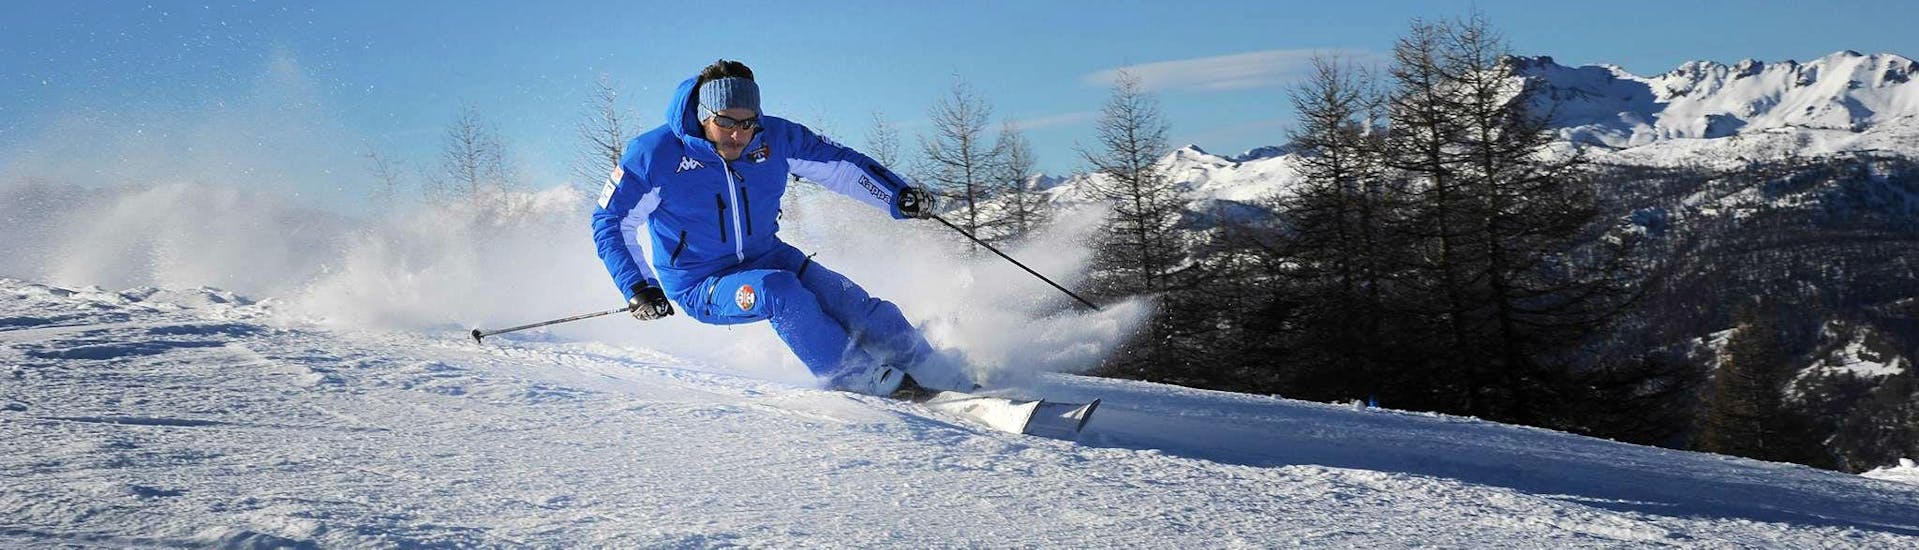 A ski instructor from the ski school Scuola di Sci Olimpionica in Sestriere is demonstrating the correct carving technique during one of the Ski Lessons for Adults - Holidays - Beginner.